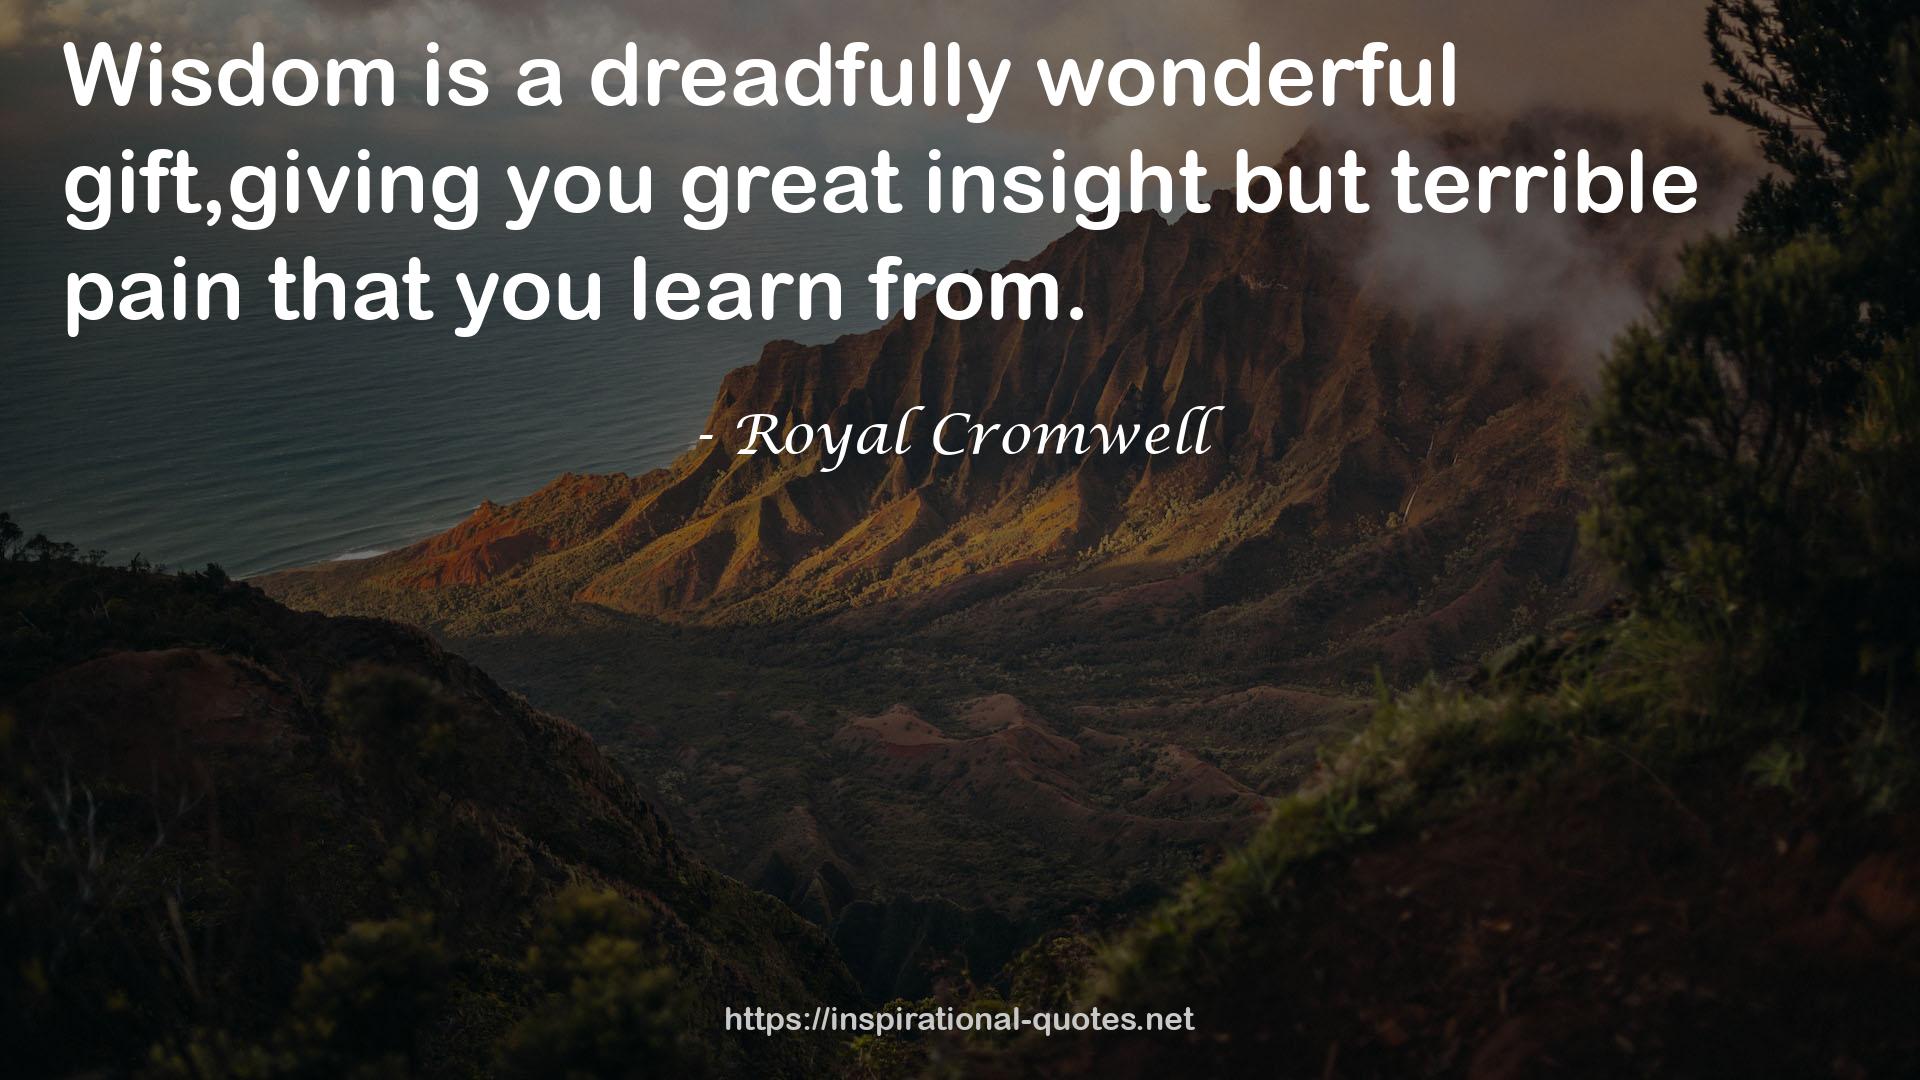 Royal Cromwell QUOTES